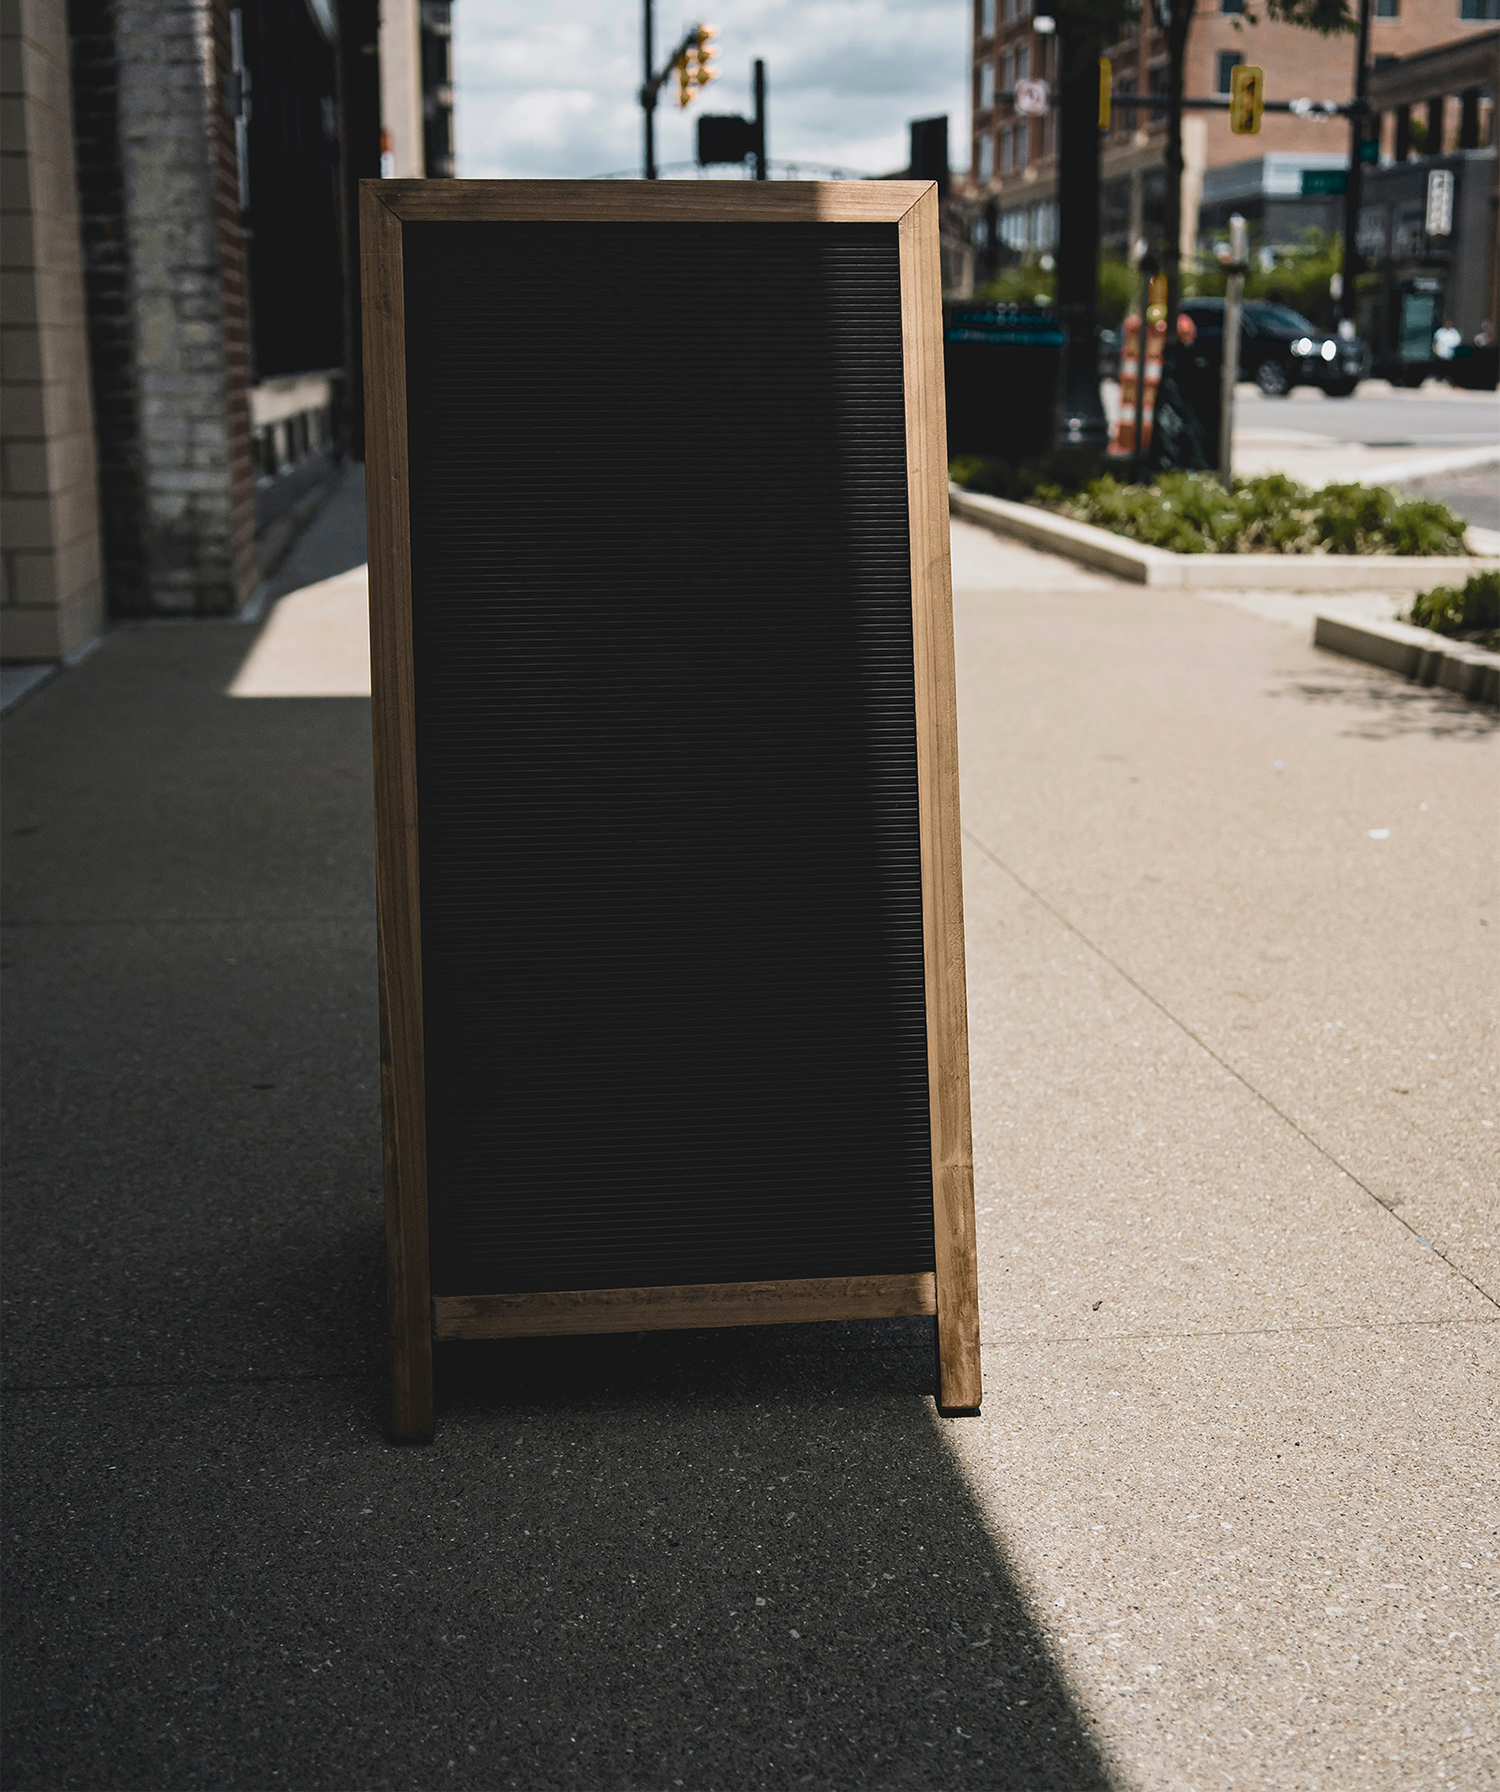 Street A-Stand Sign PSD Mockup